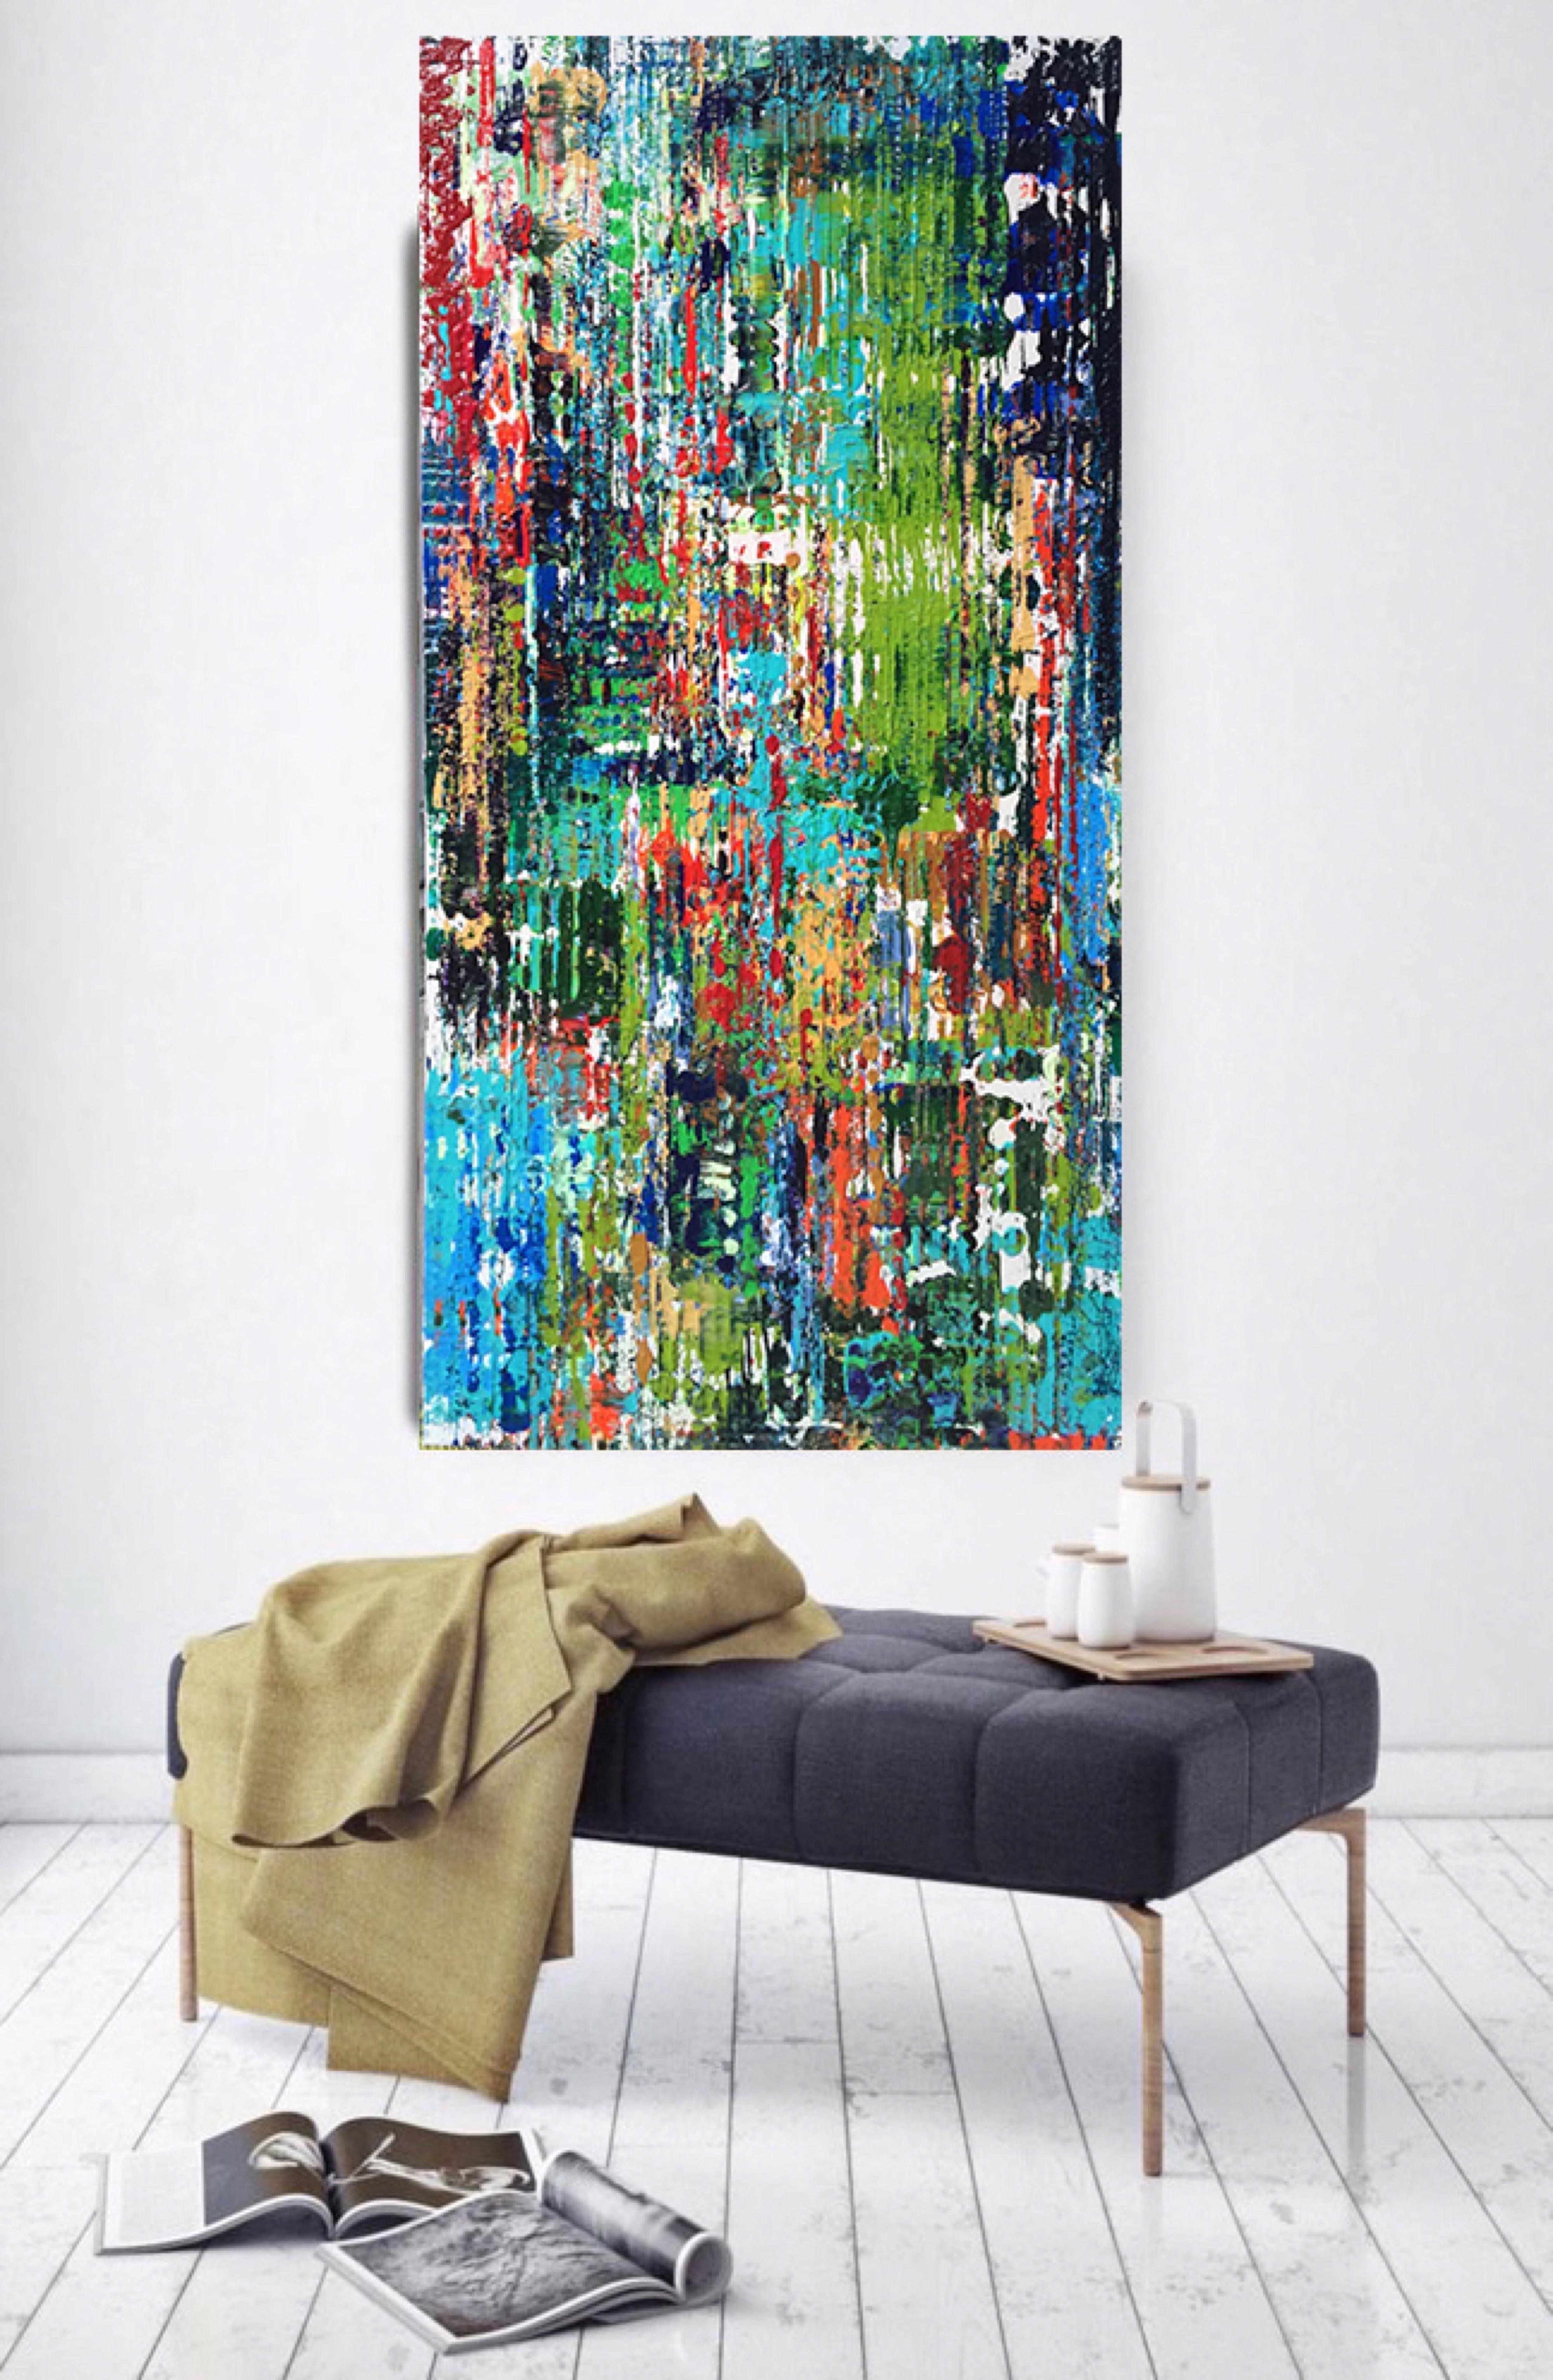 Green Blue Abstract Mixed Media on Canvas: Textured, Summer Breeze 24 x 48